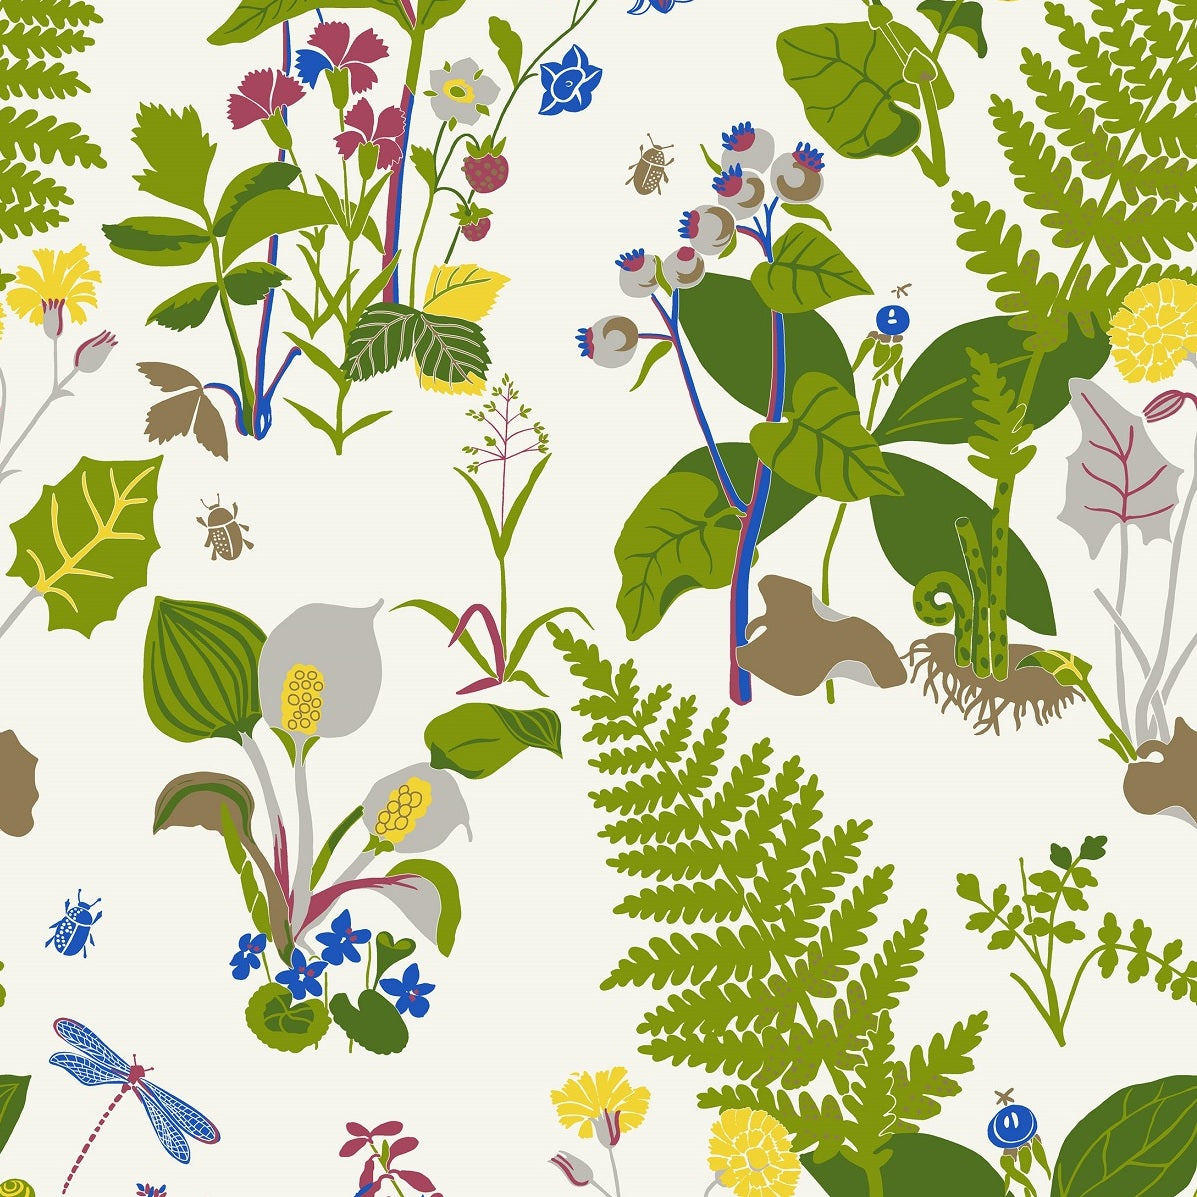 This pattern by Gocken Jobs was first designed for NK (the Nordic Company) and appeared at their great exhibition in 1945. The wallpaper is printed in our oldest surface-printing machine